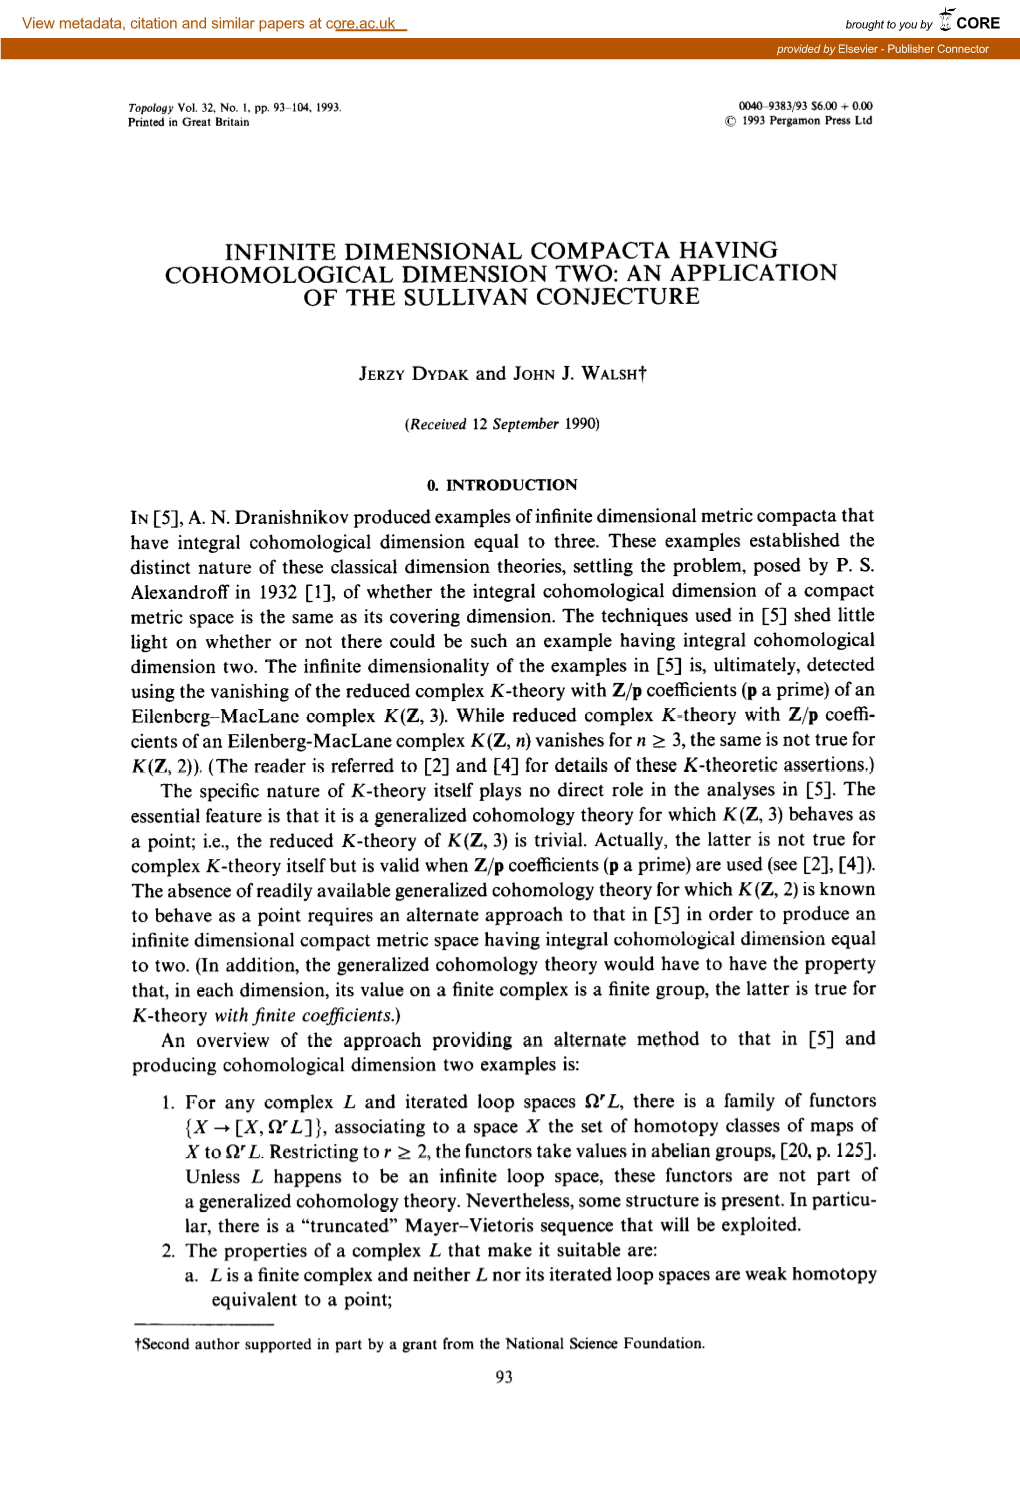 Infinite Dimensional Compacta Having Cohomological Dimension Two: an Application of the Sullivan Conjecture